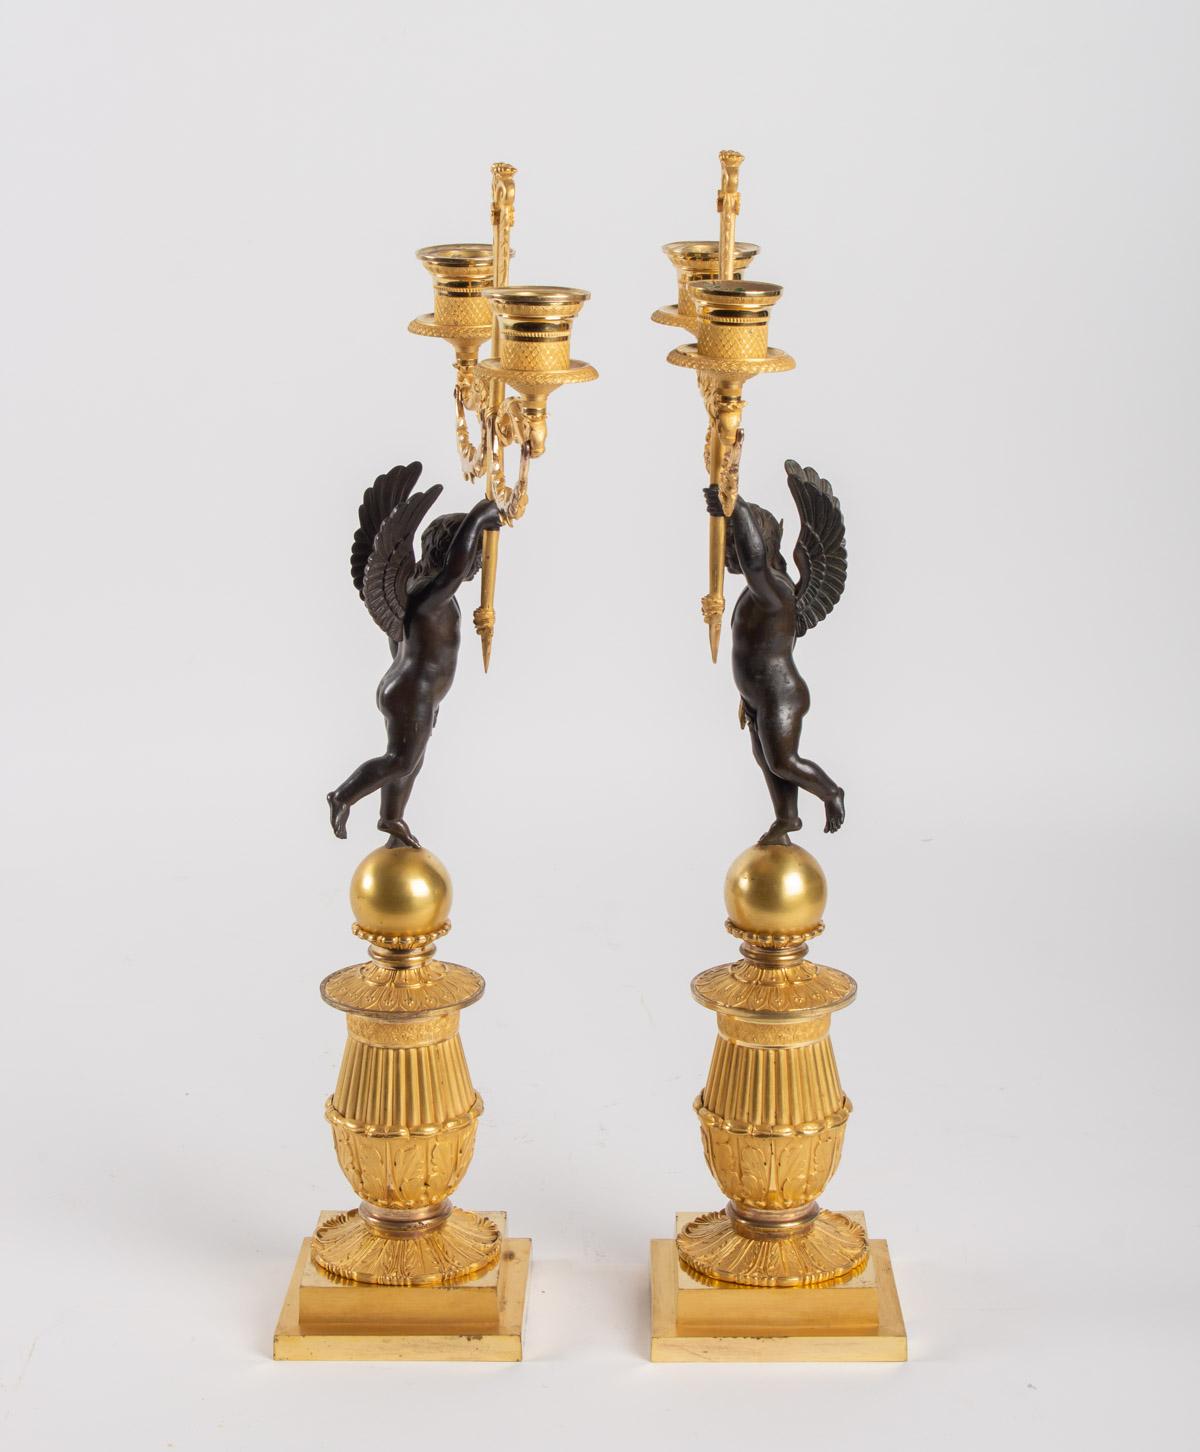 Louis XVI Pair of Candelabra in Gilt Bronze and Patinated, 19th Century